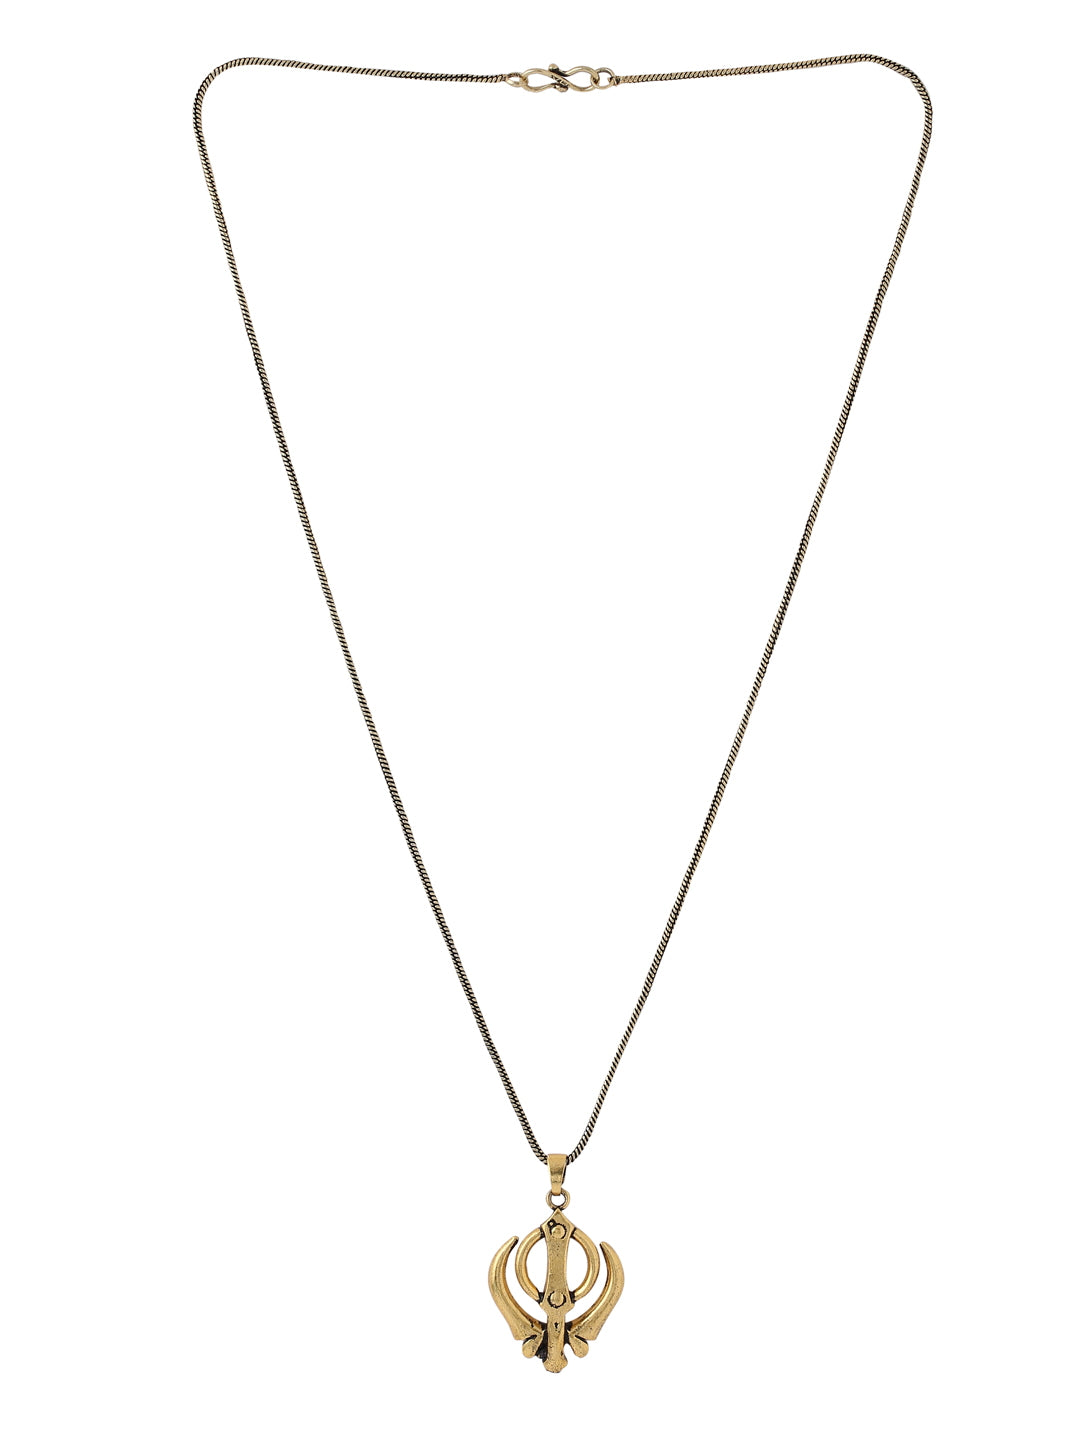 Gold Plated Sikh Khanda Pendant with Chain -Viraasi